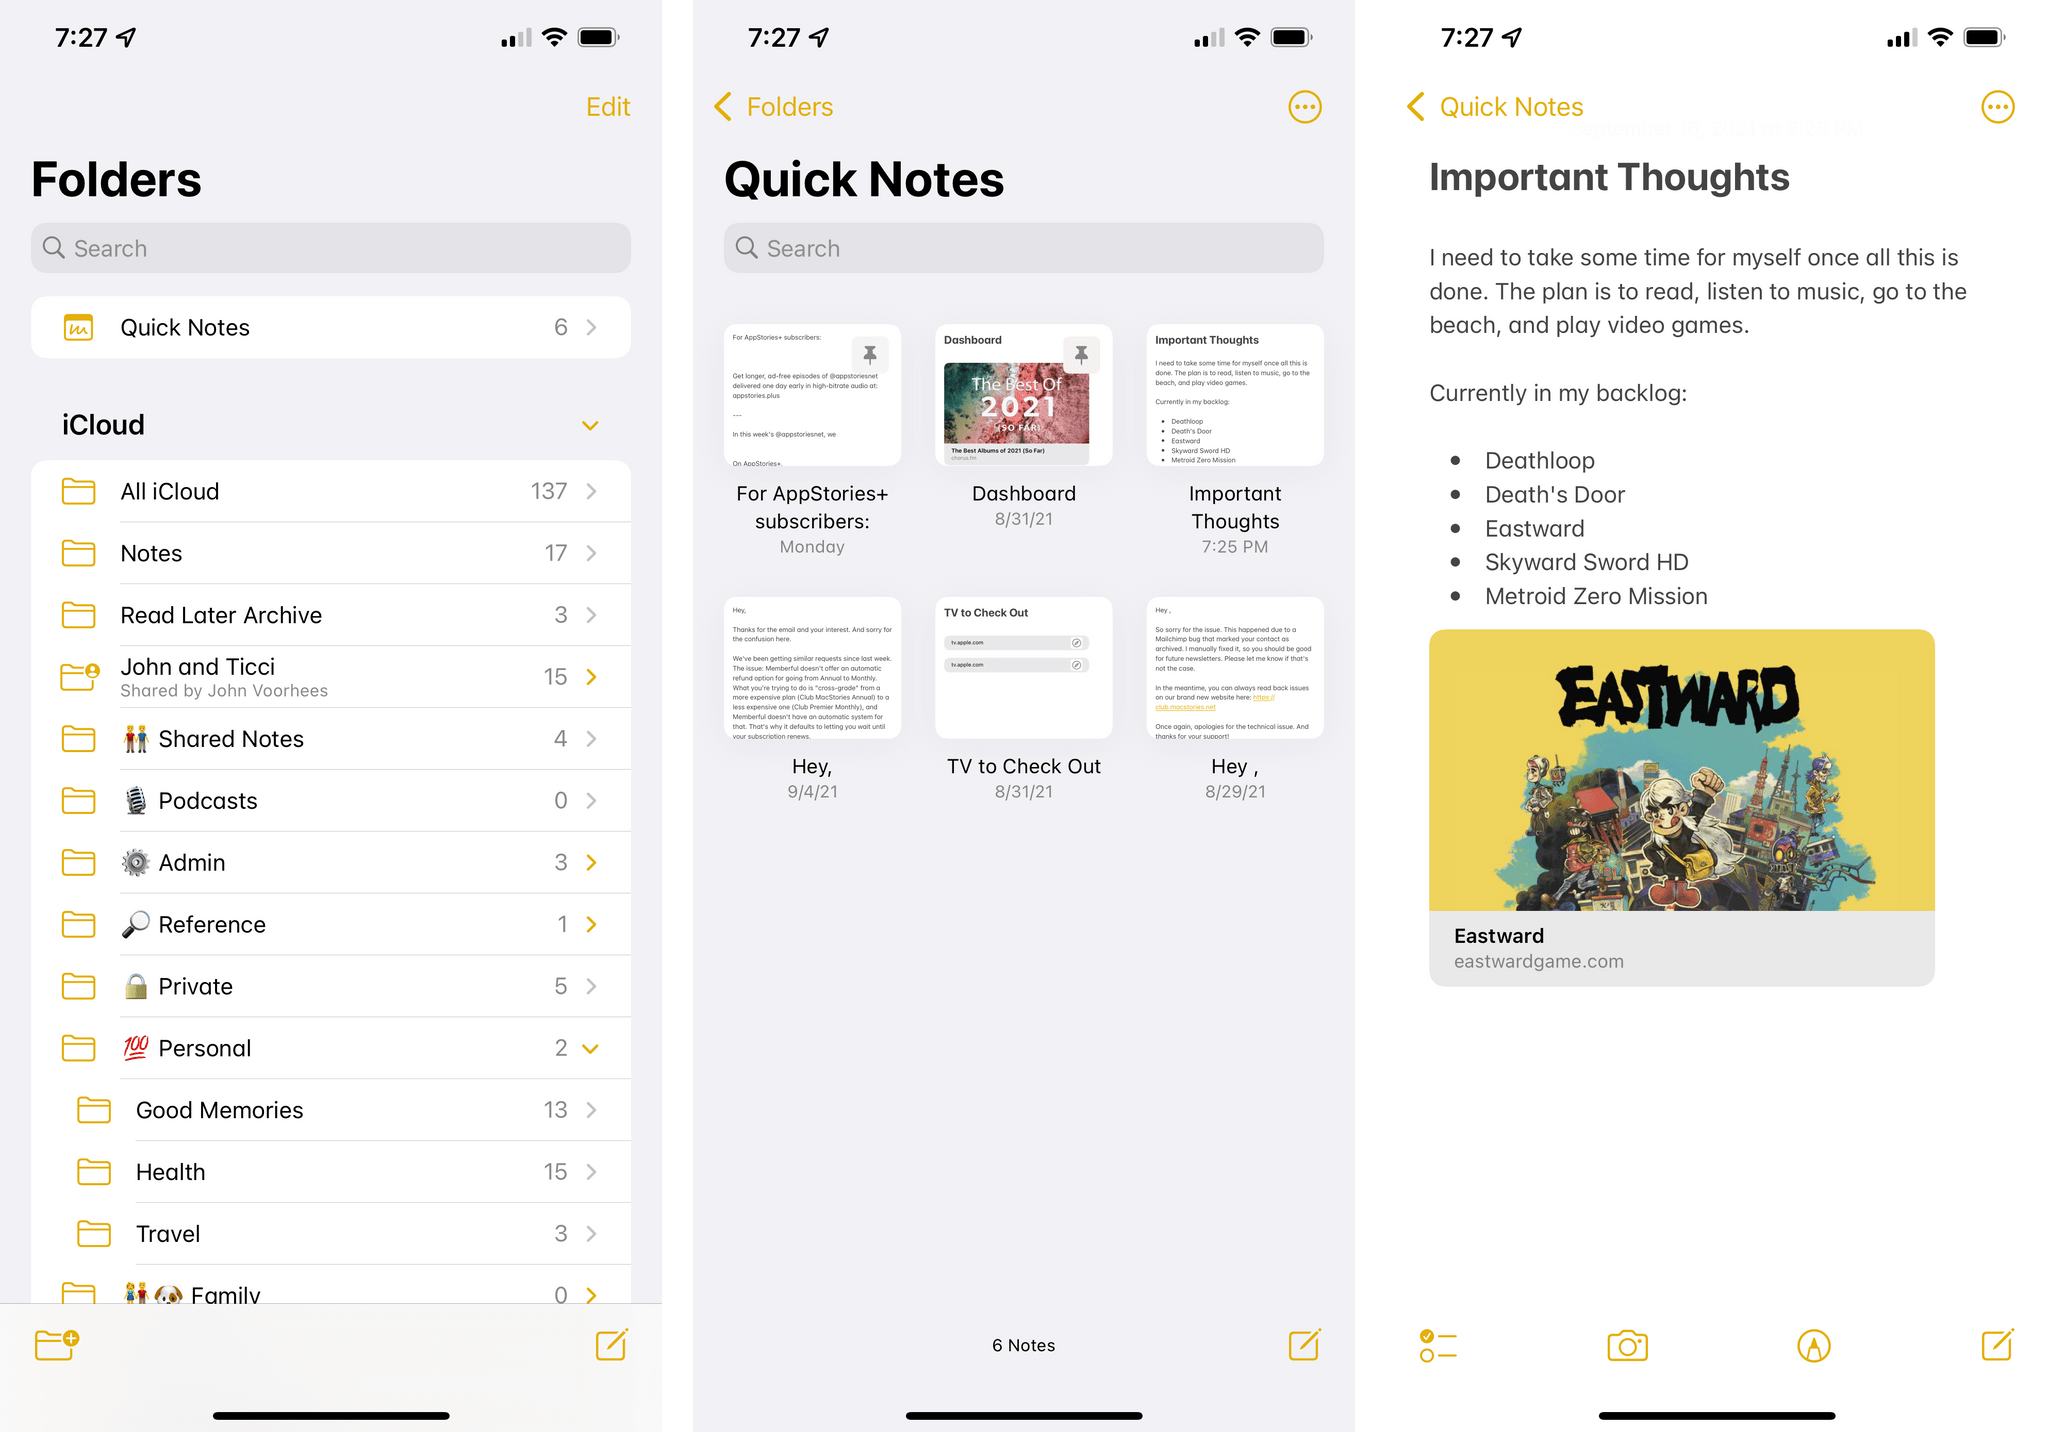 You can view Quick Notes on iPhone, and you can edit them or create new ones, but only inside the Notes app.